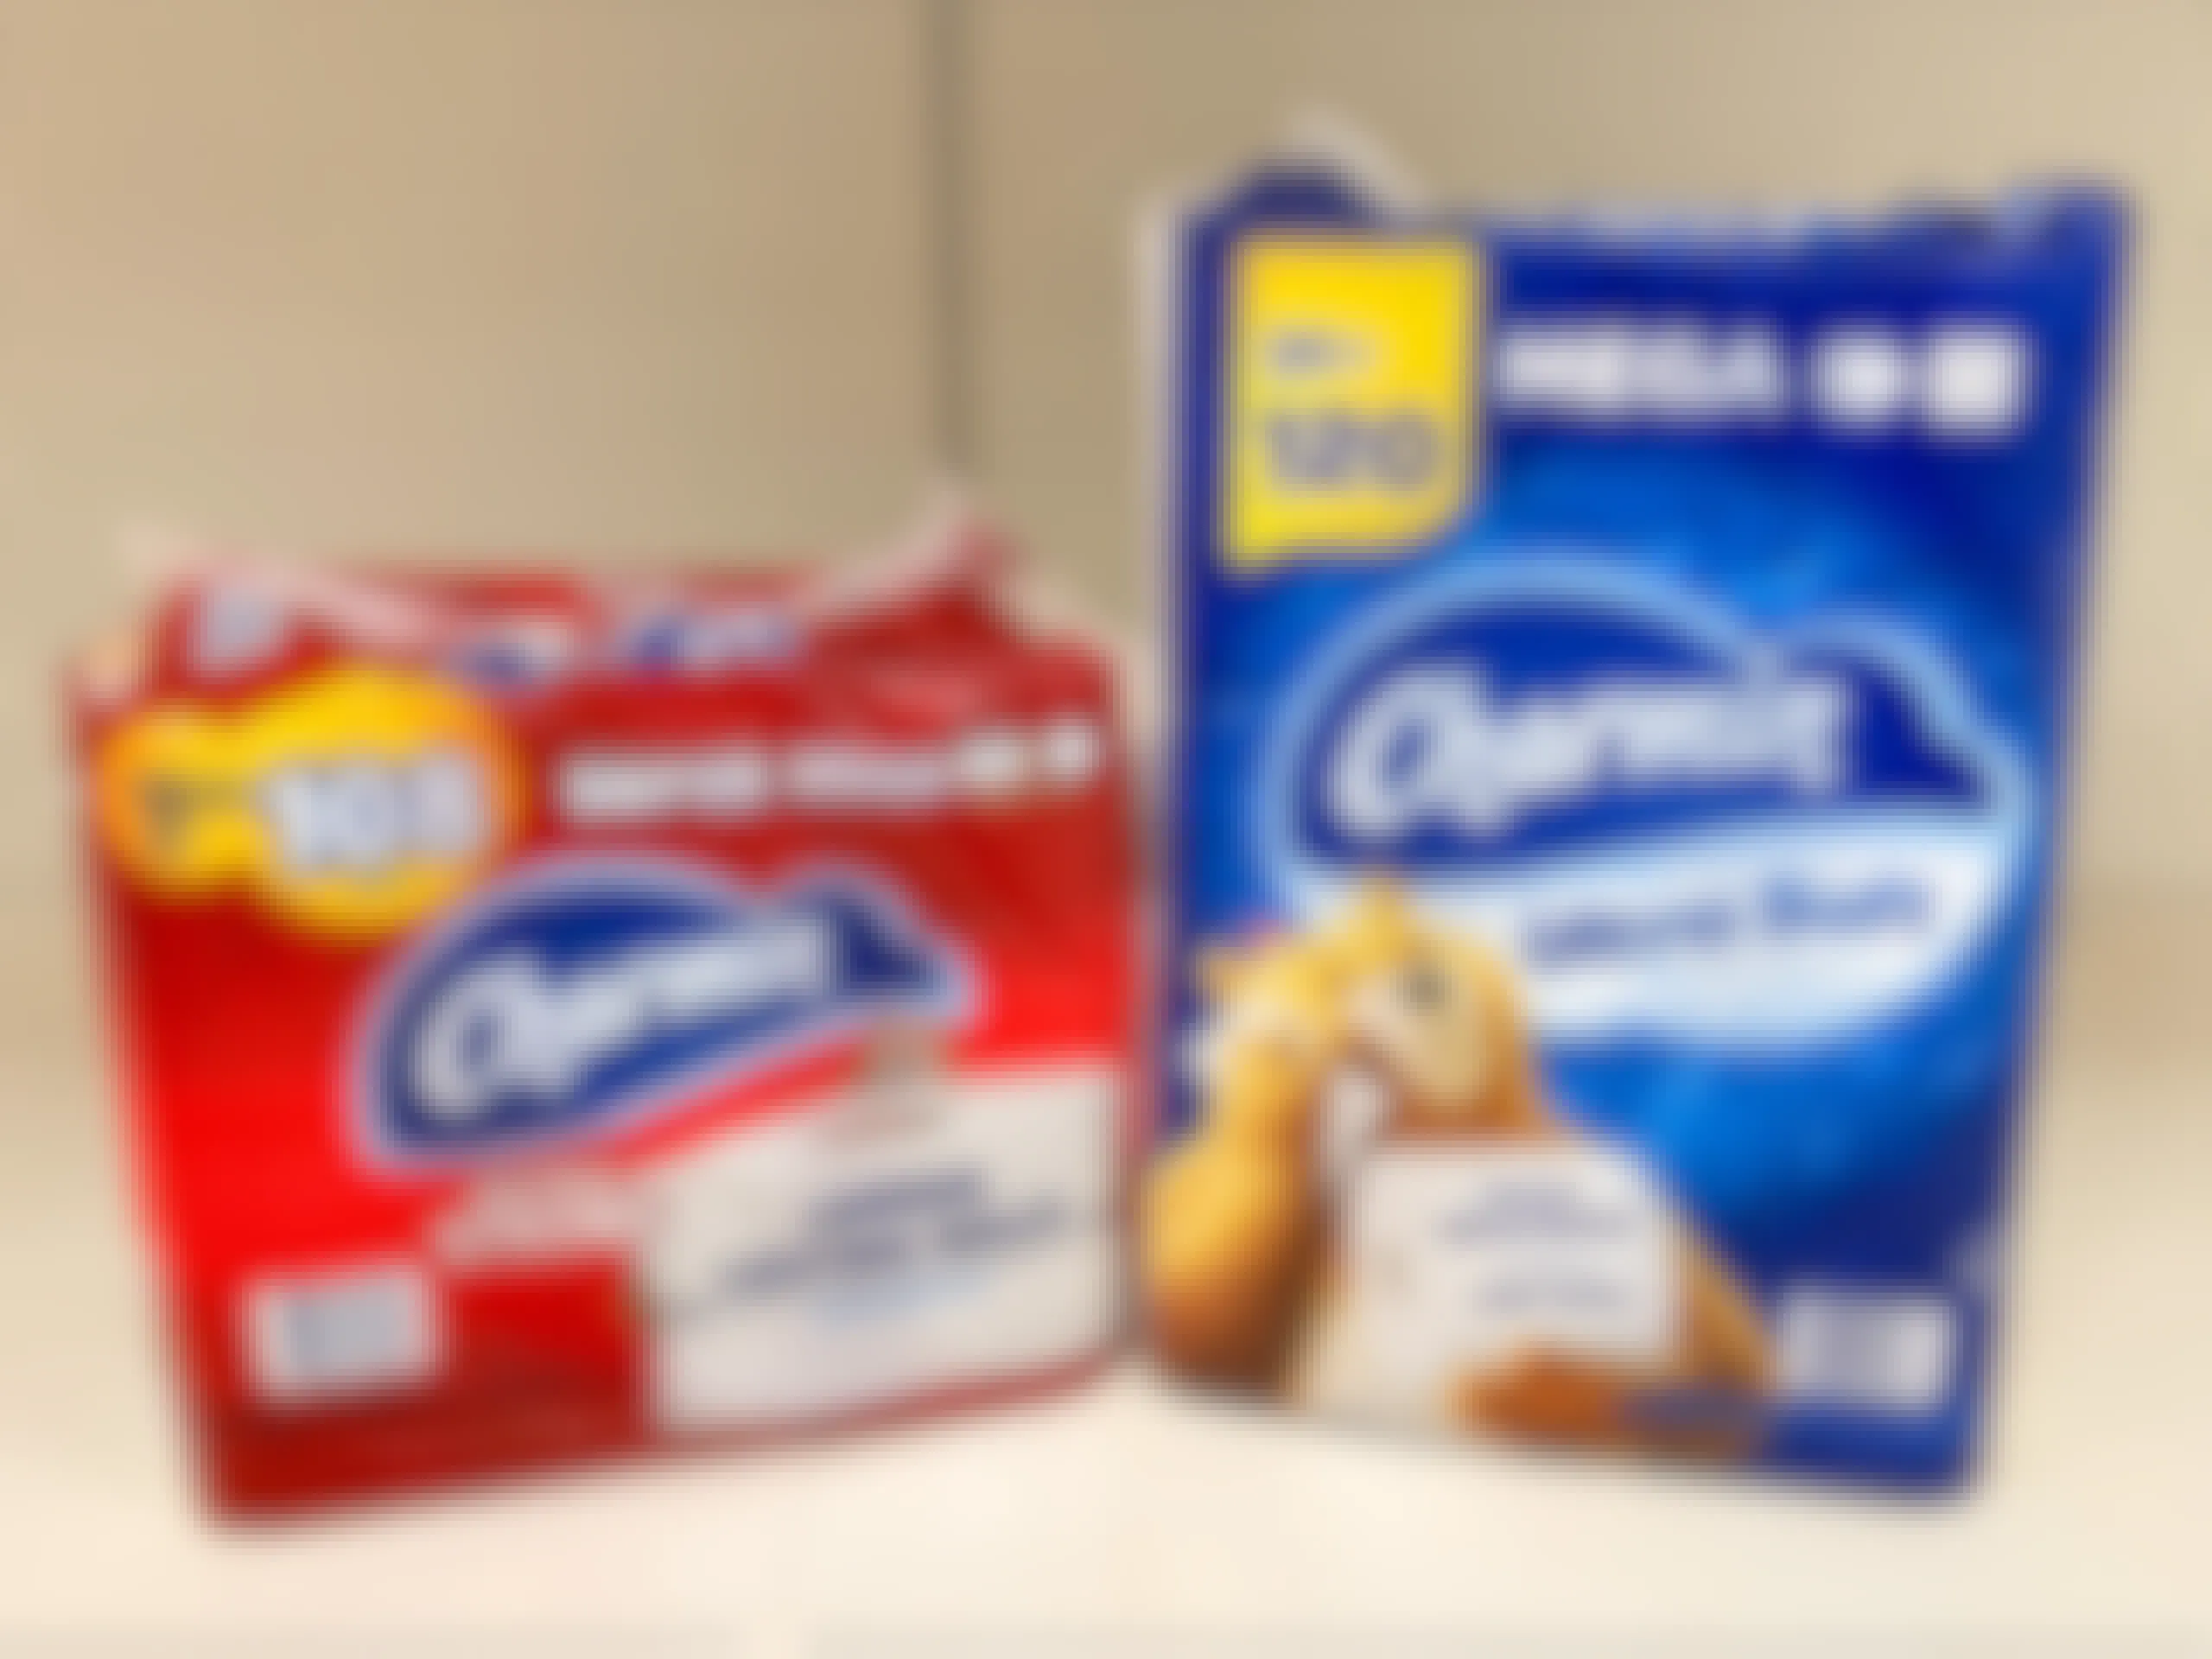 Two packages of Charmin toilet paper on store shelf